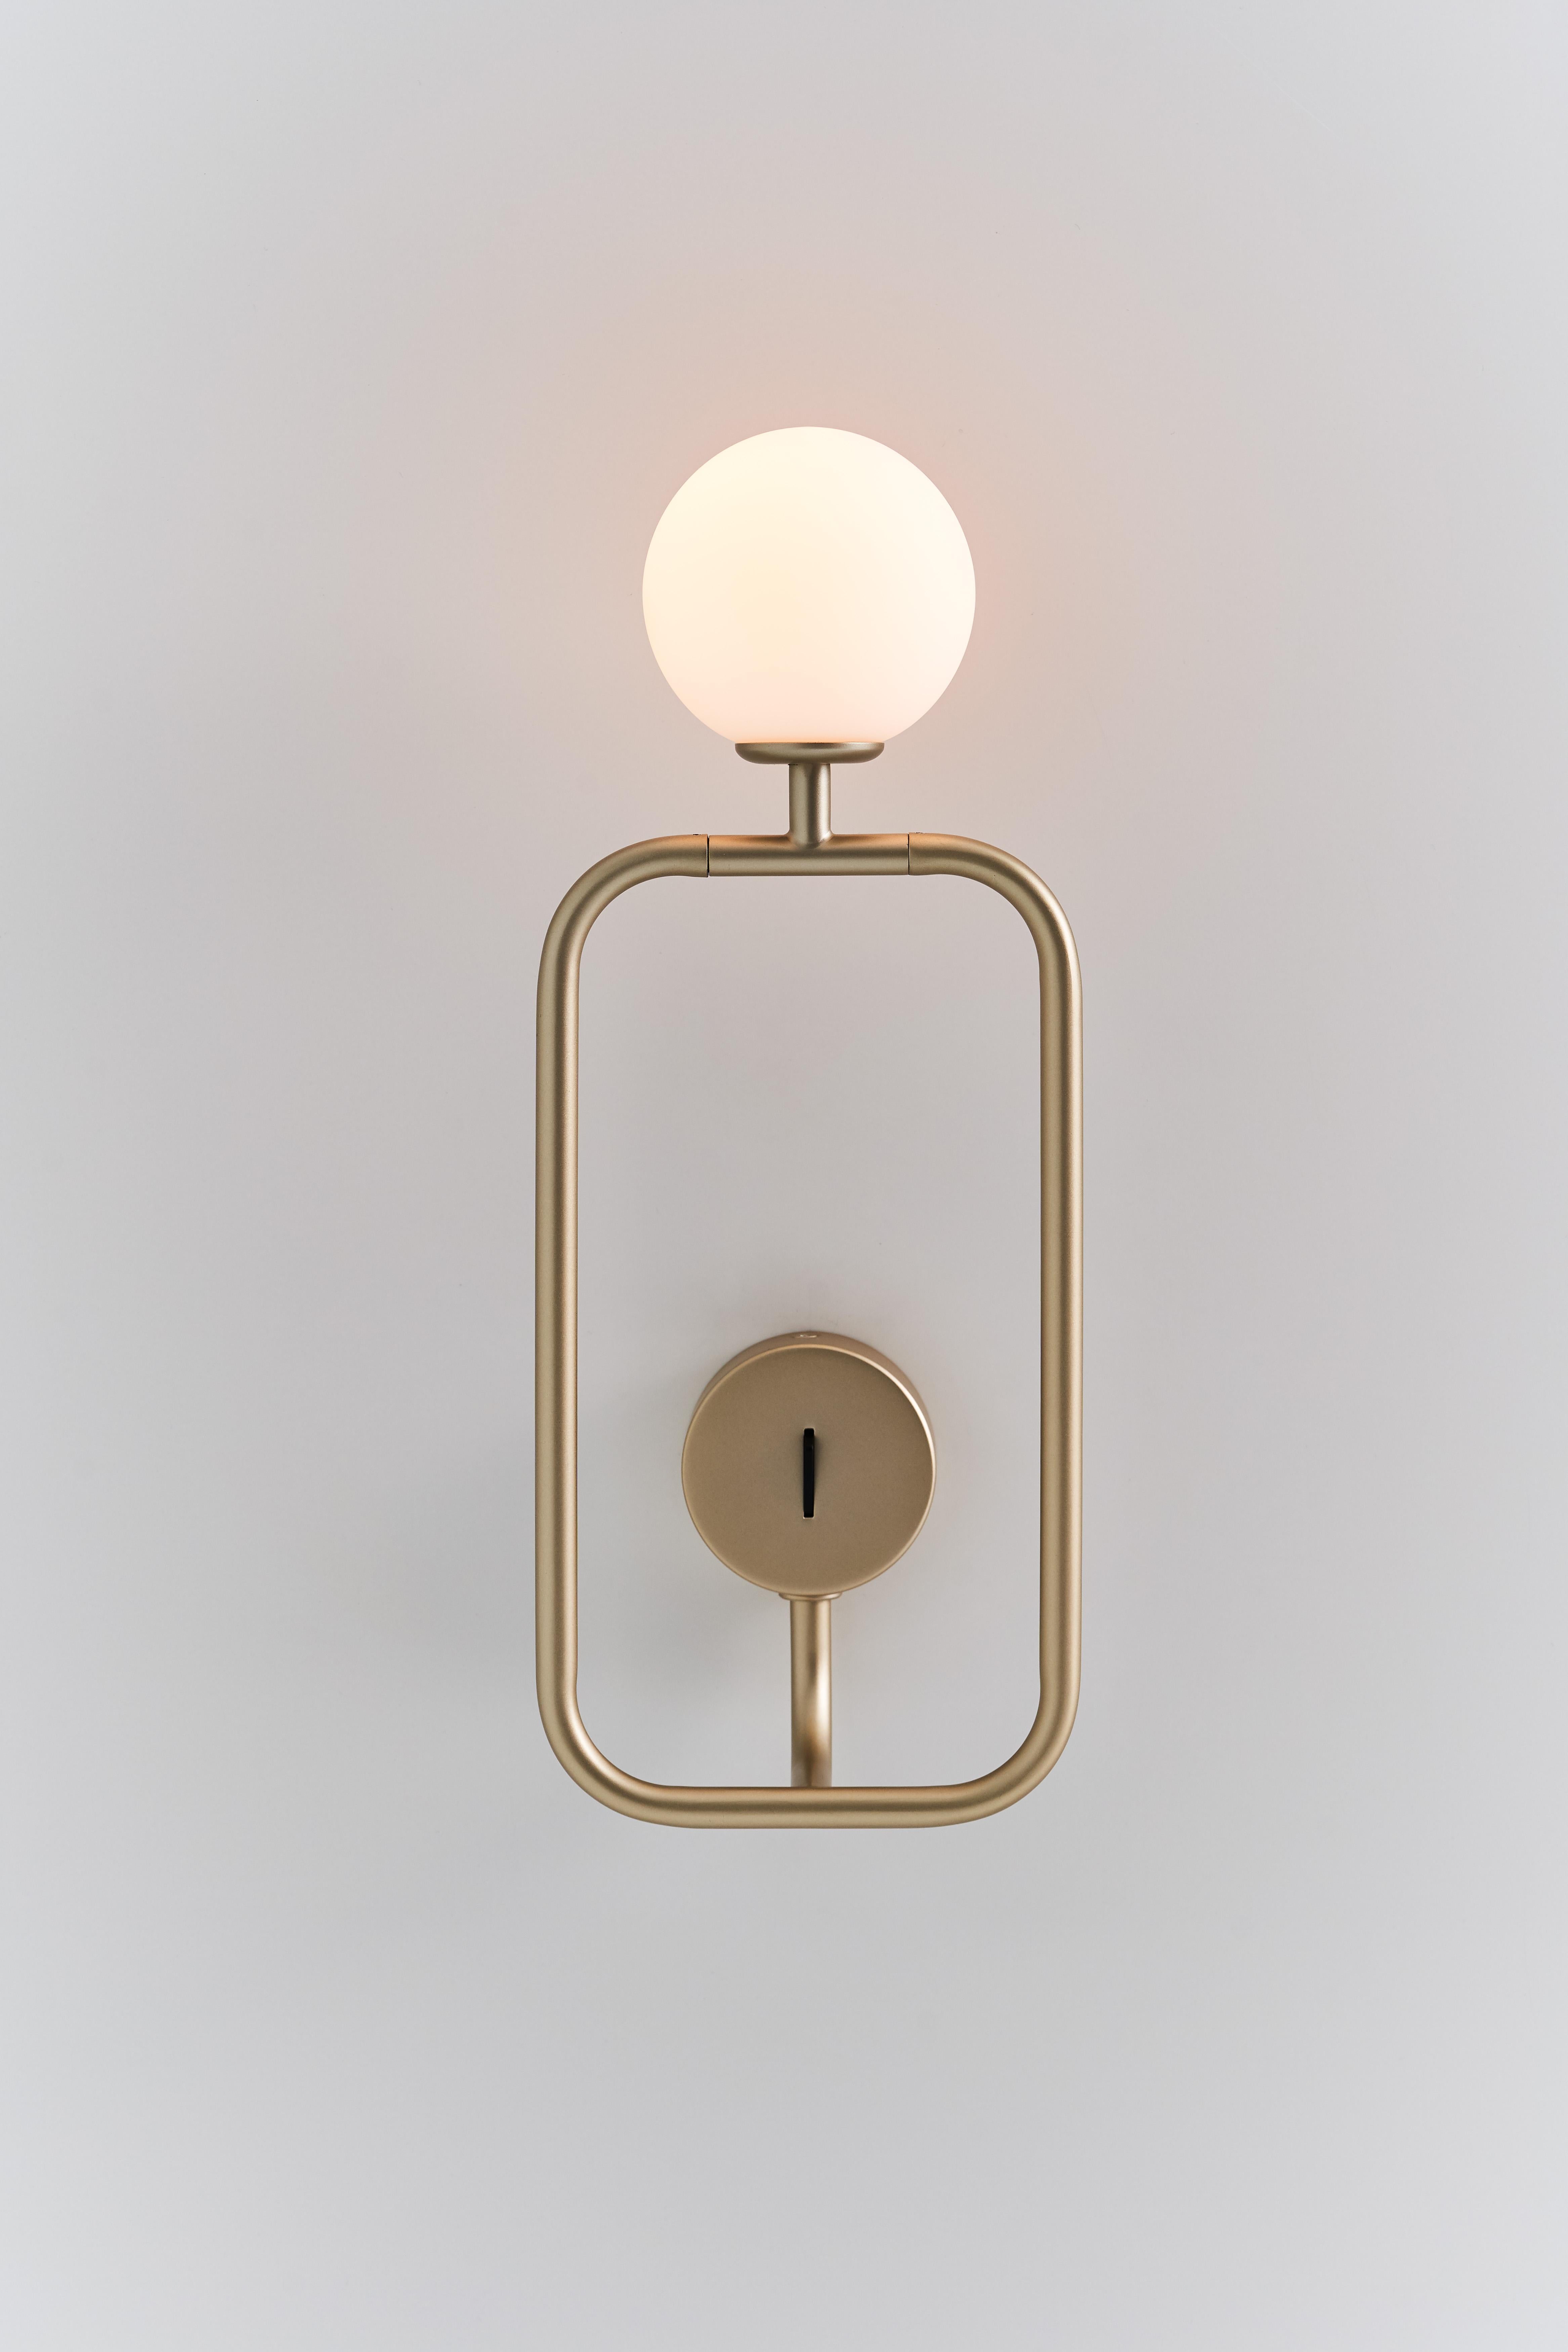 Contemporary Sircle Wall Sconce For Sale